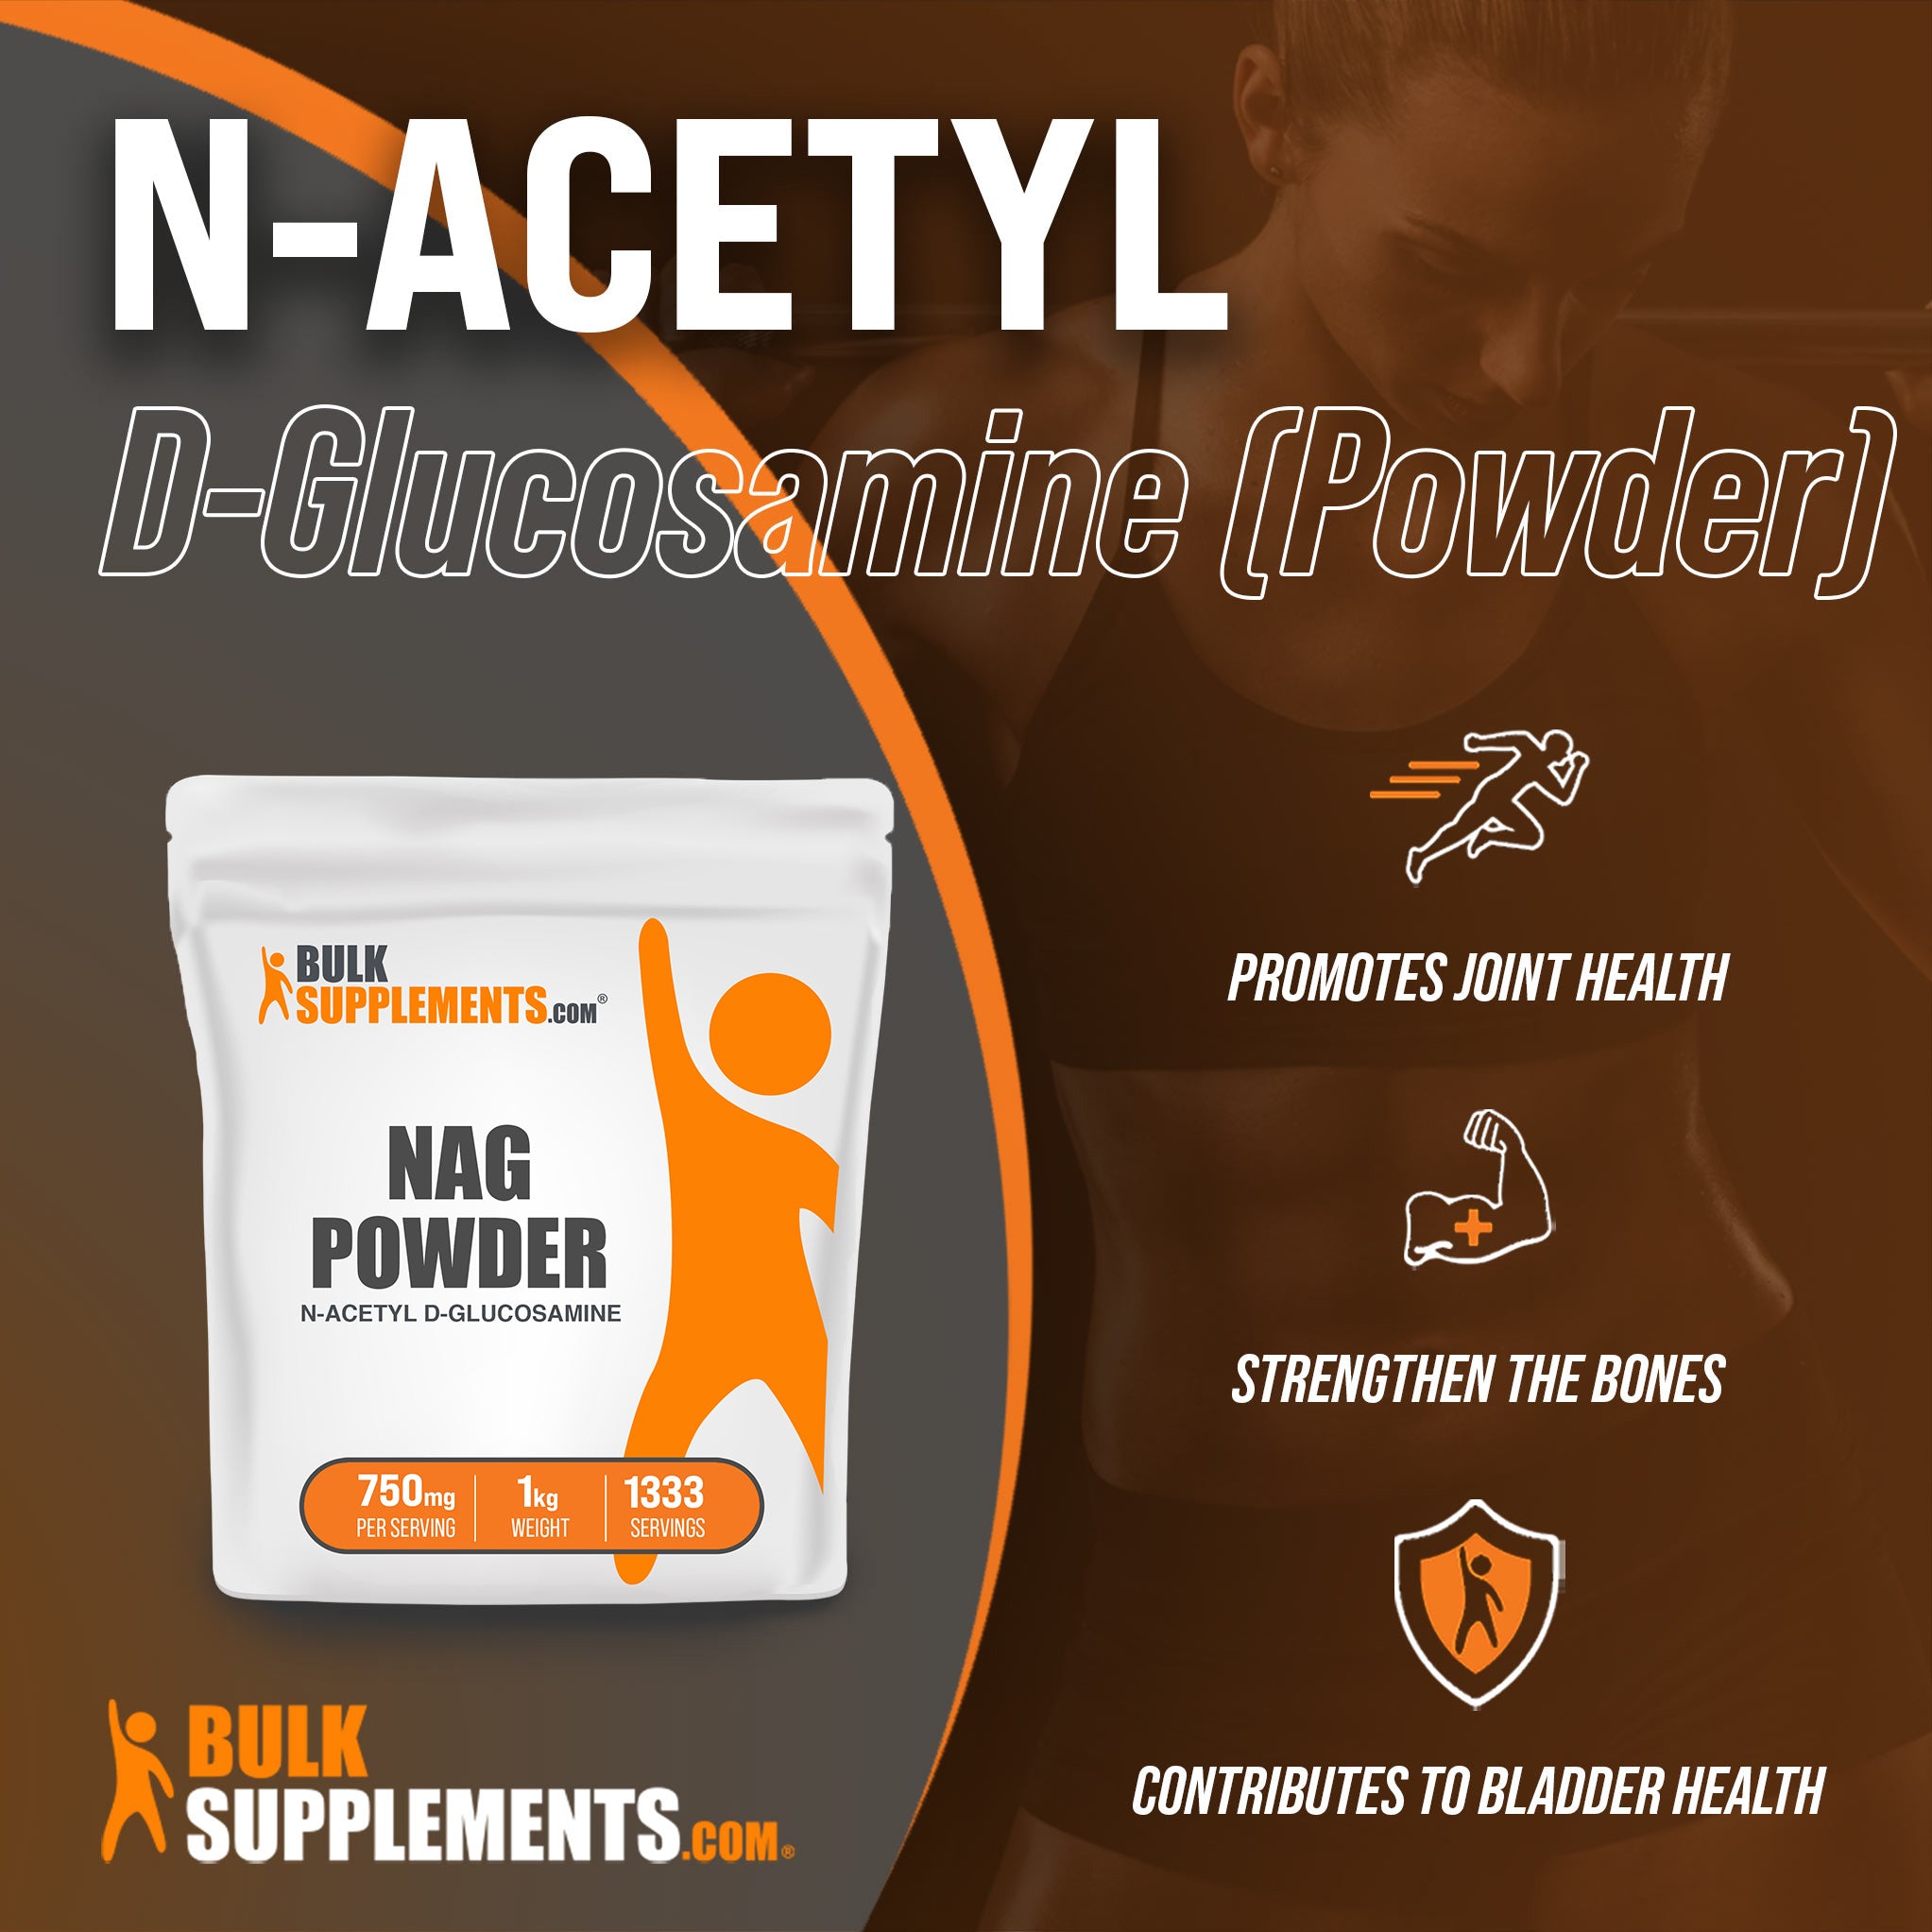 Benefits of N-Acetyl D-Glucosamine: promotes joint health, strengthen the bones, contributes to bladder health